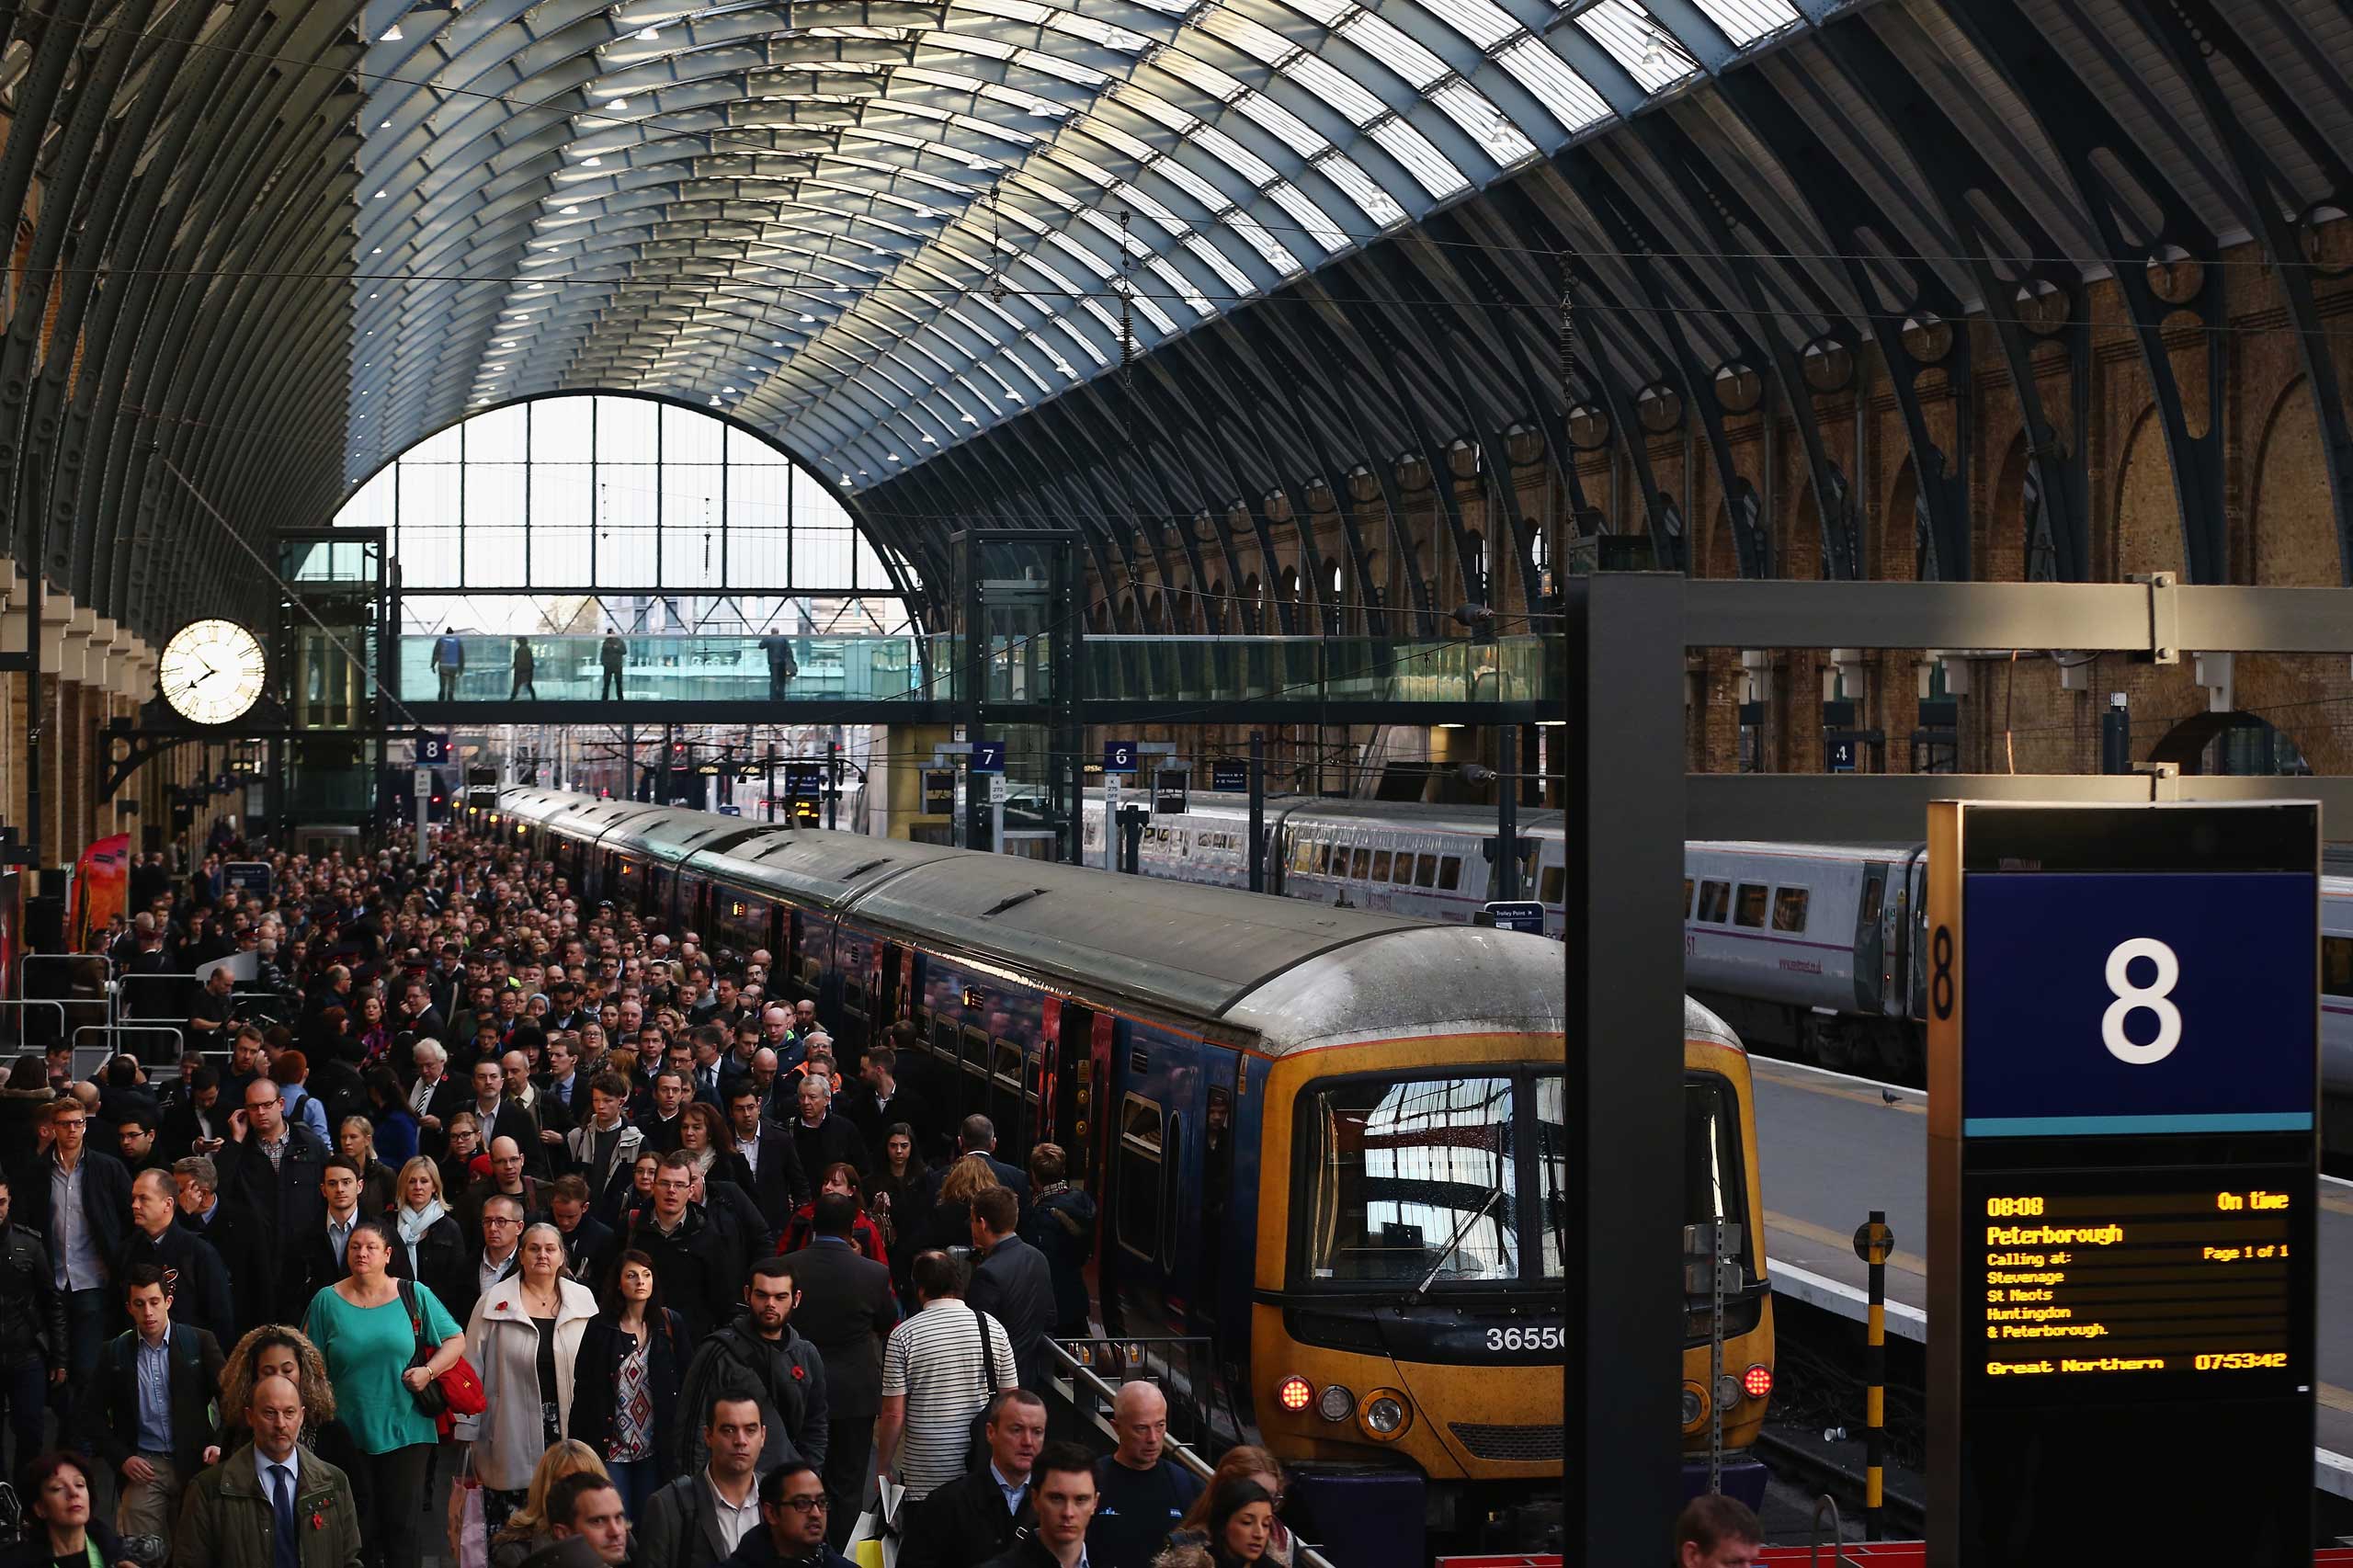 Rush Hour At King's Cross Train Station